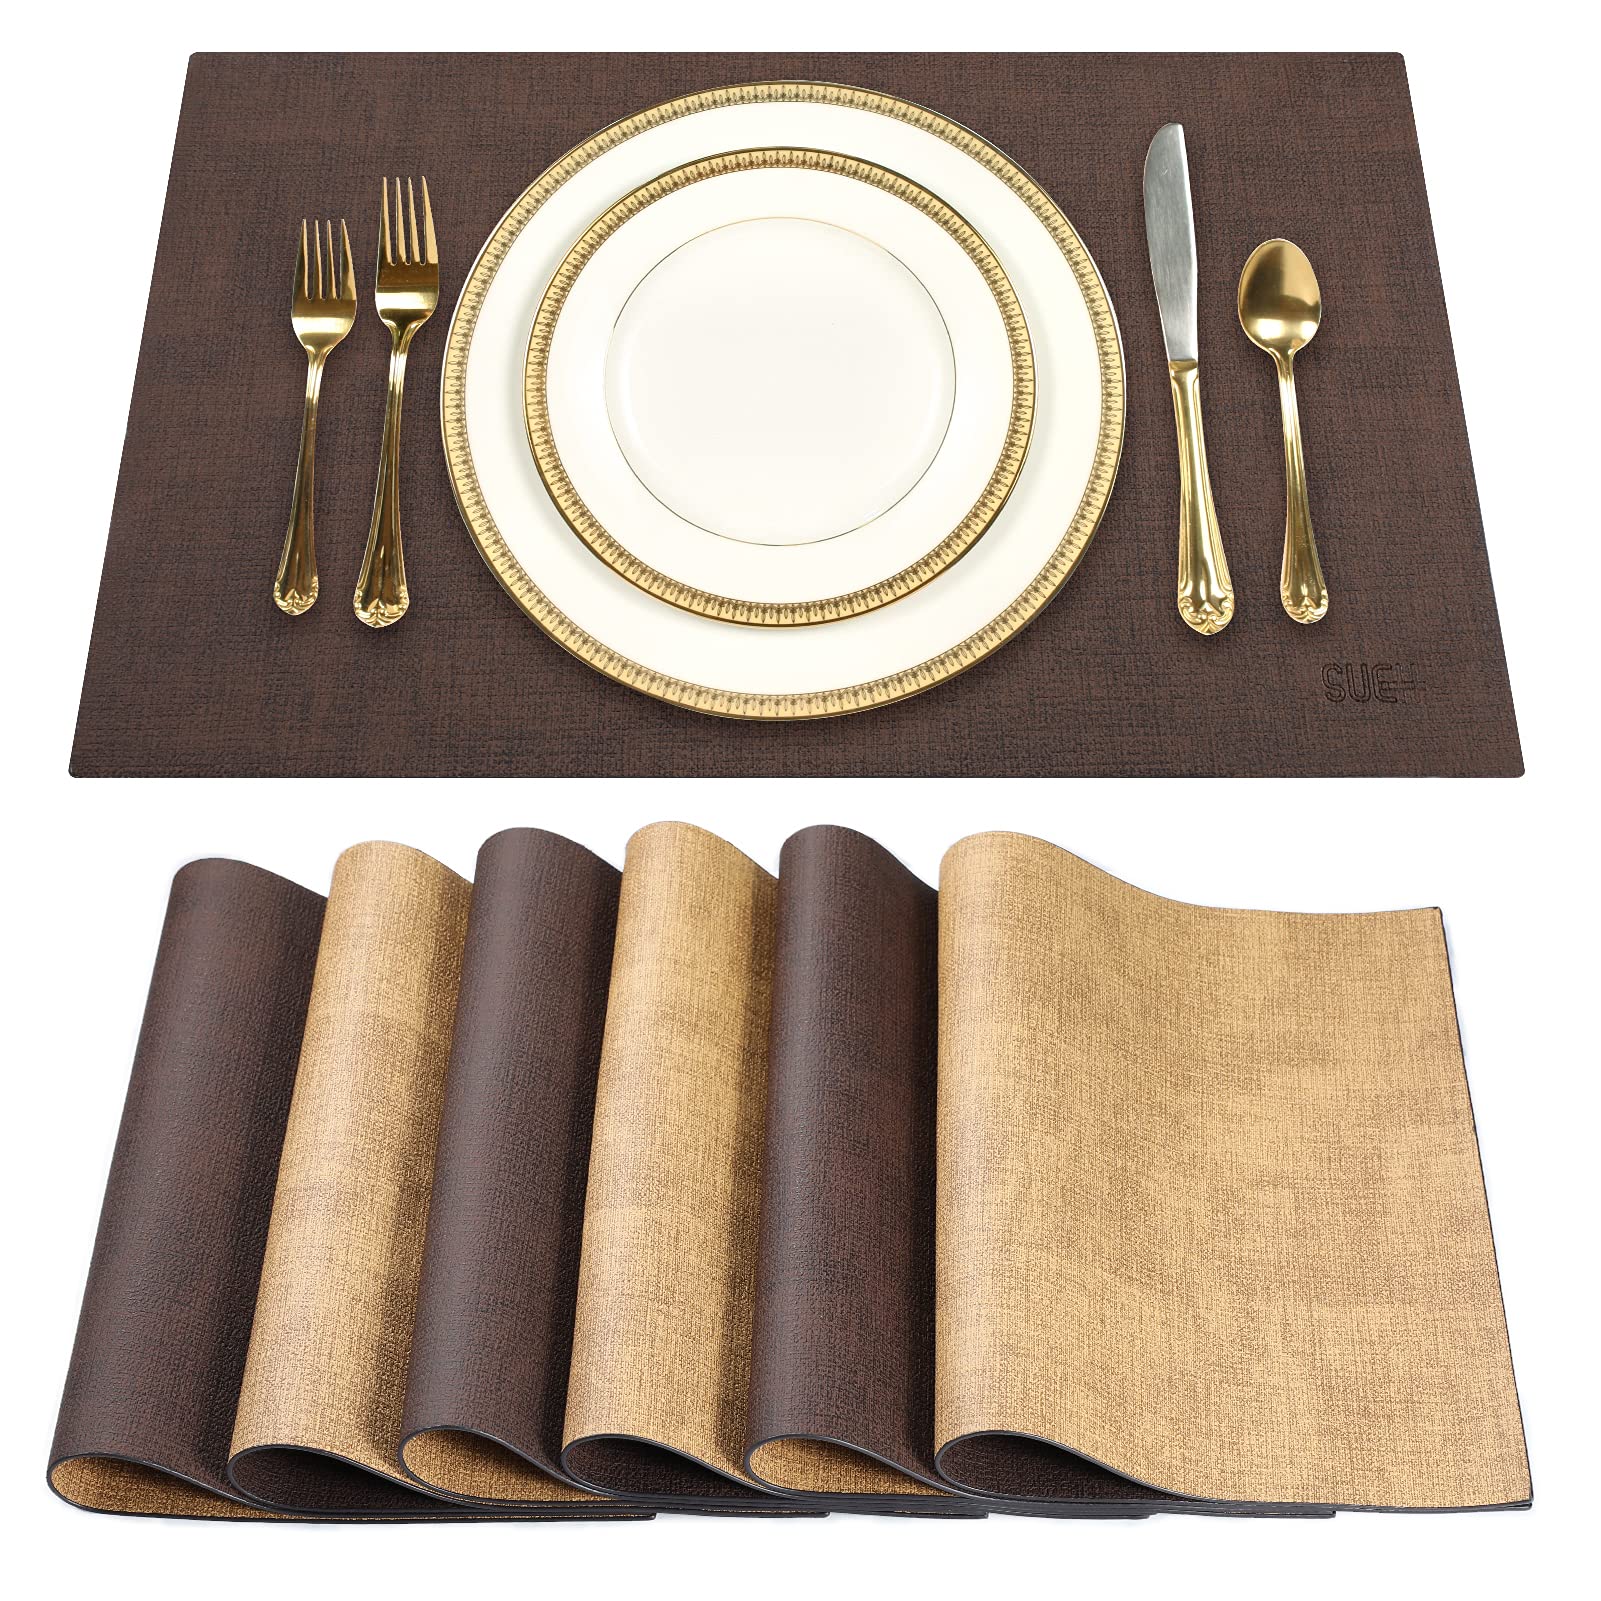 SUEH DESIGN Leather Placemats Set of 6 Reversible Table Mats Heat Resistant Waterproof No-Slip Place Mats for Dining Table Kitchen Parties